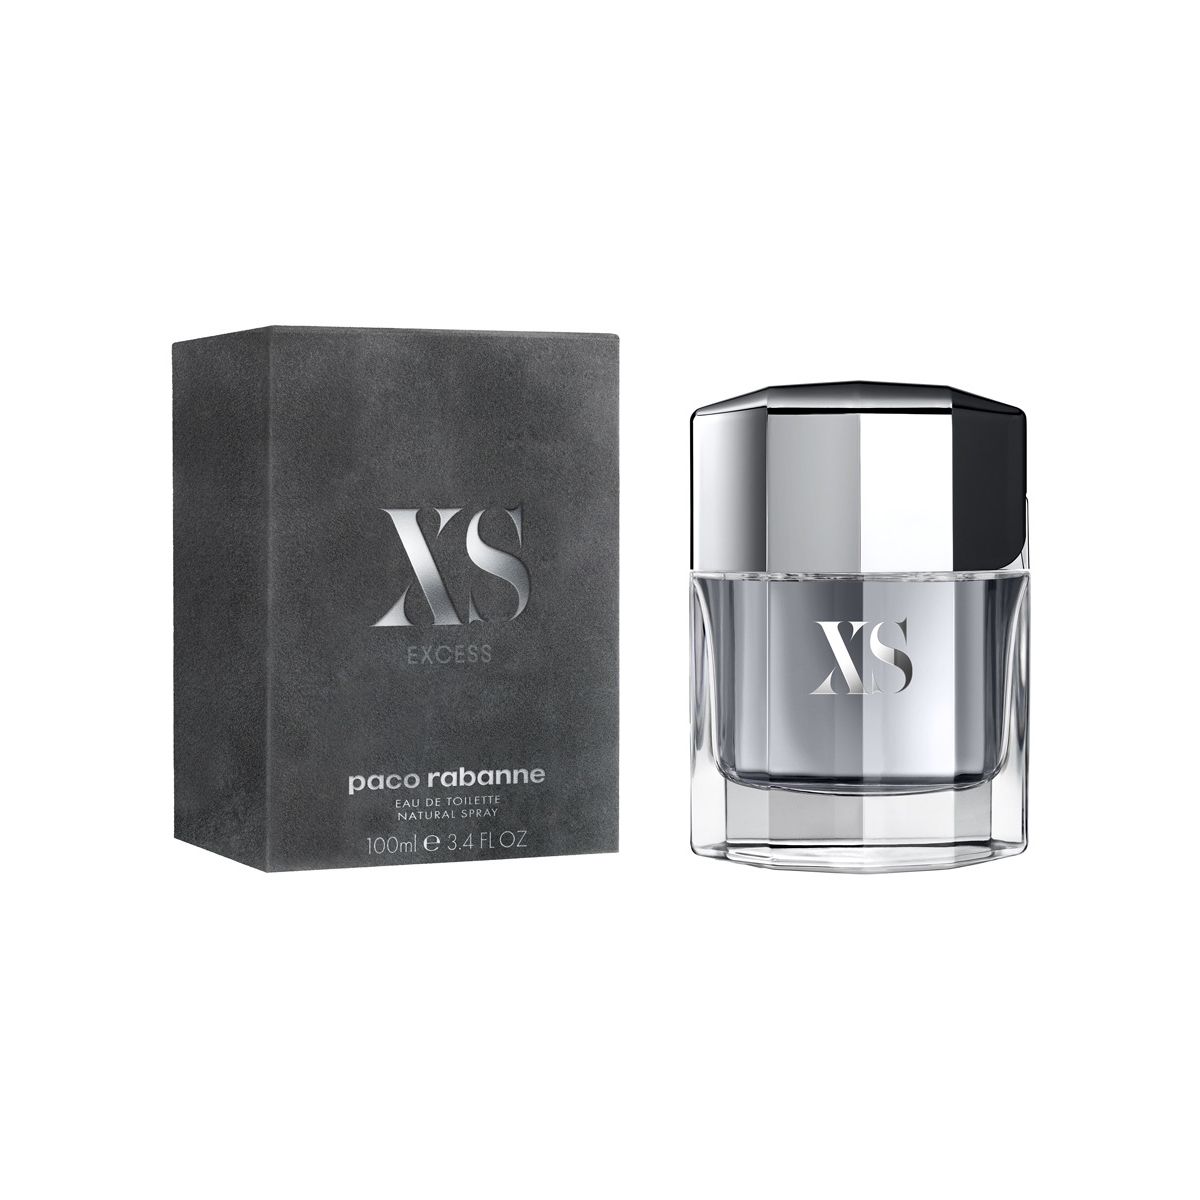 XS Pour Homme - Paco Rabanne - 100 ml - edt